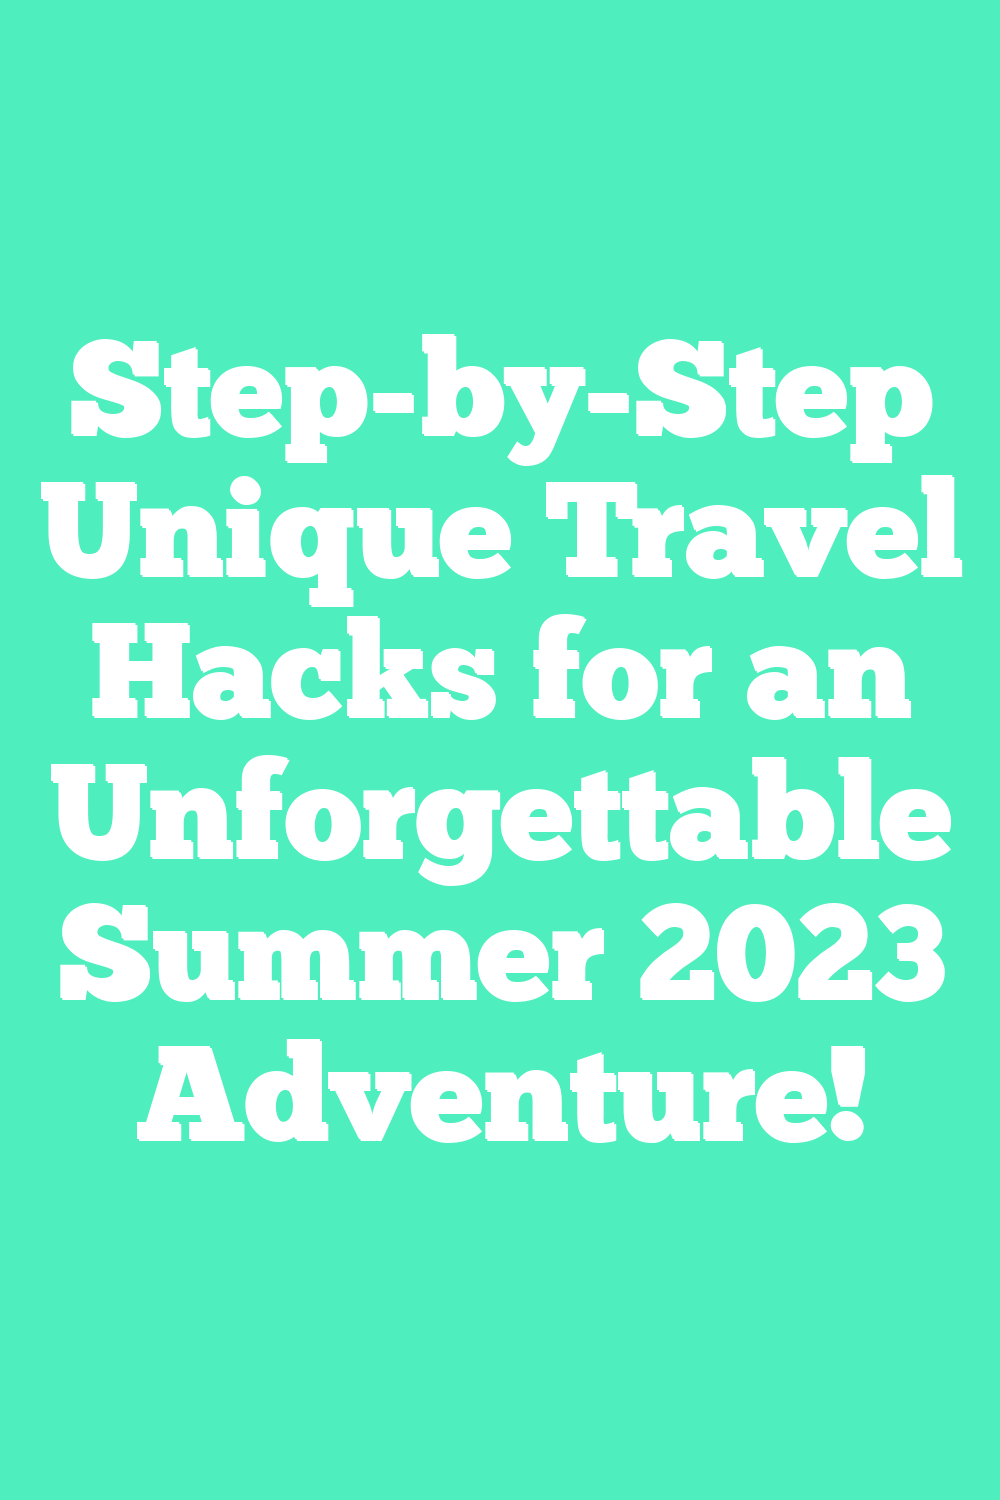 Step-by-Step Unique Travel Hacks for an Unforgettable Summer 2023 Adventure!